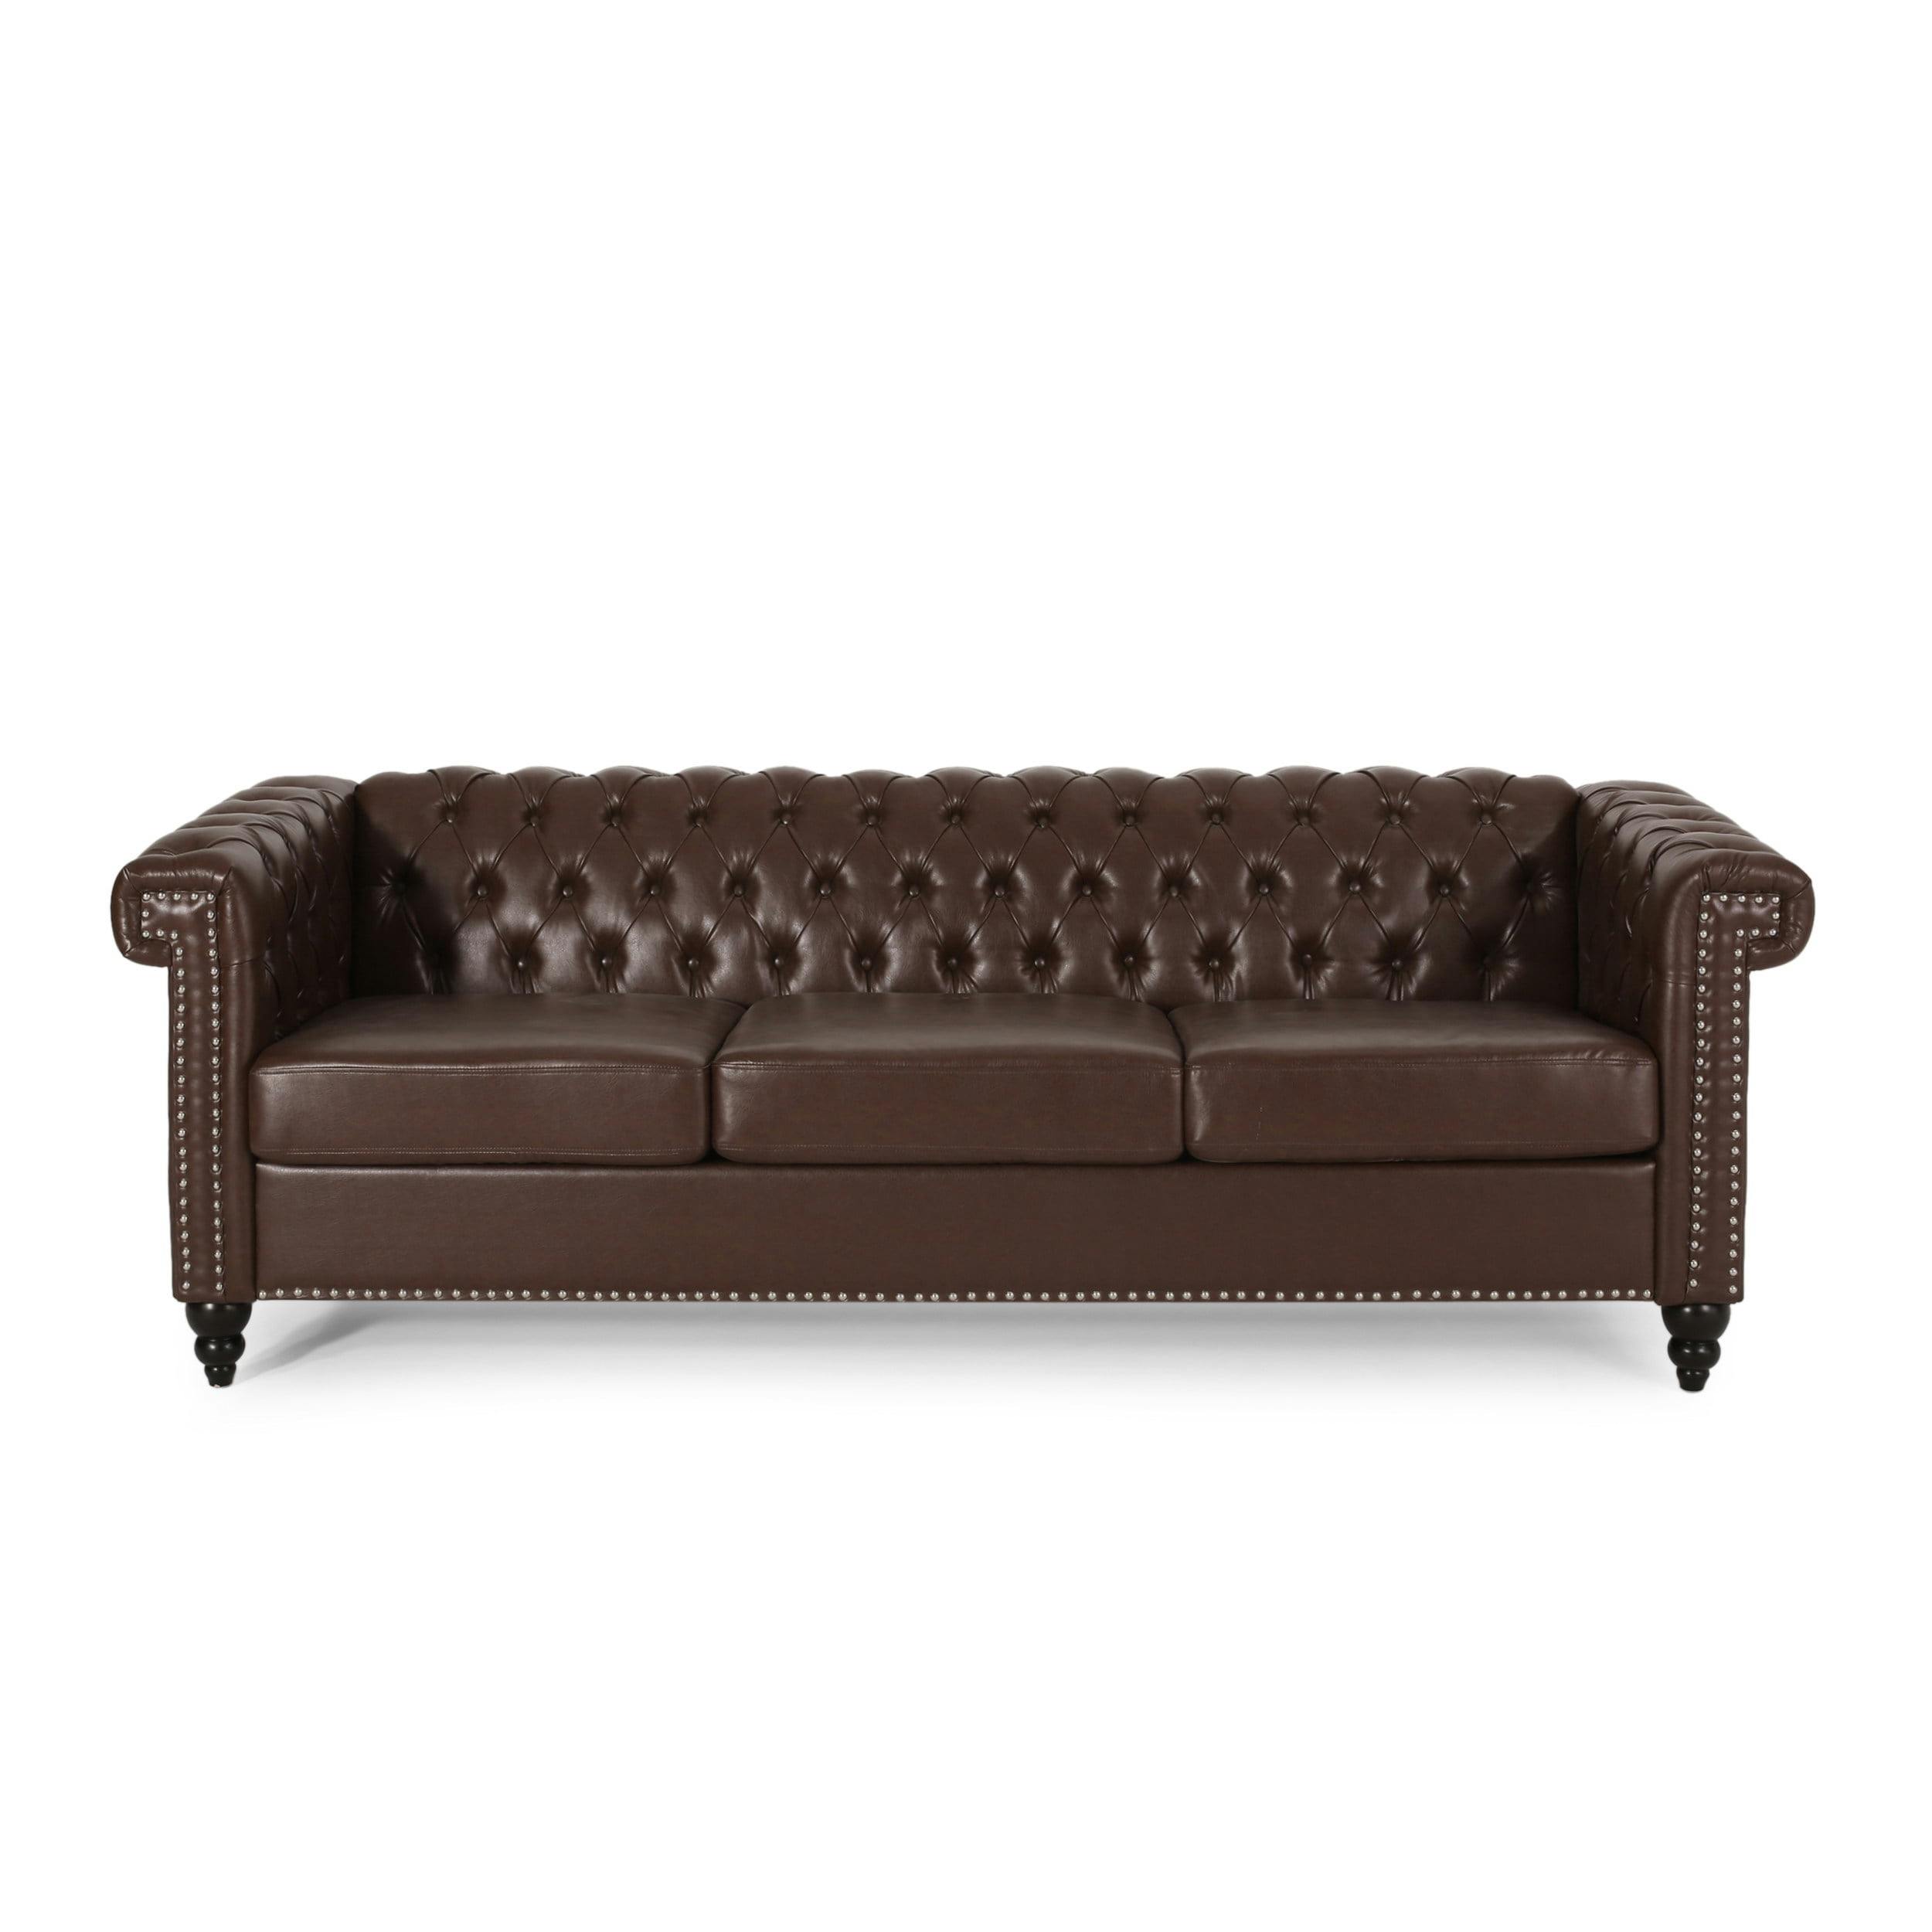 Elegant Dark Brown Faux Leather Chesterfield Sofa with Nailhead Accents